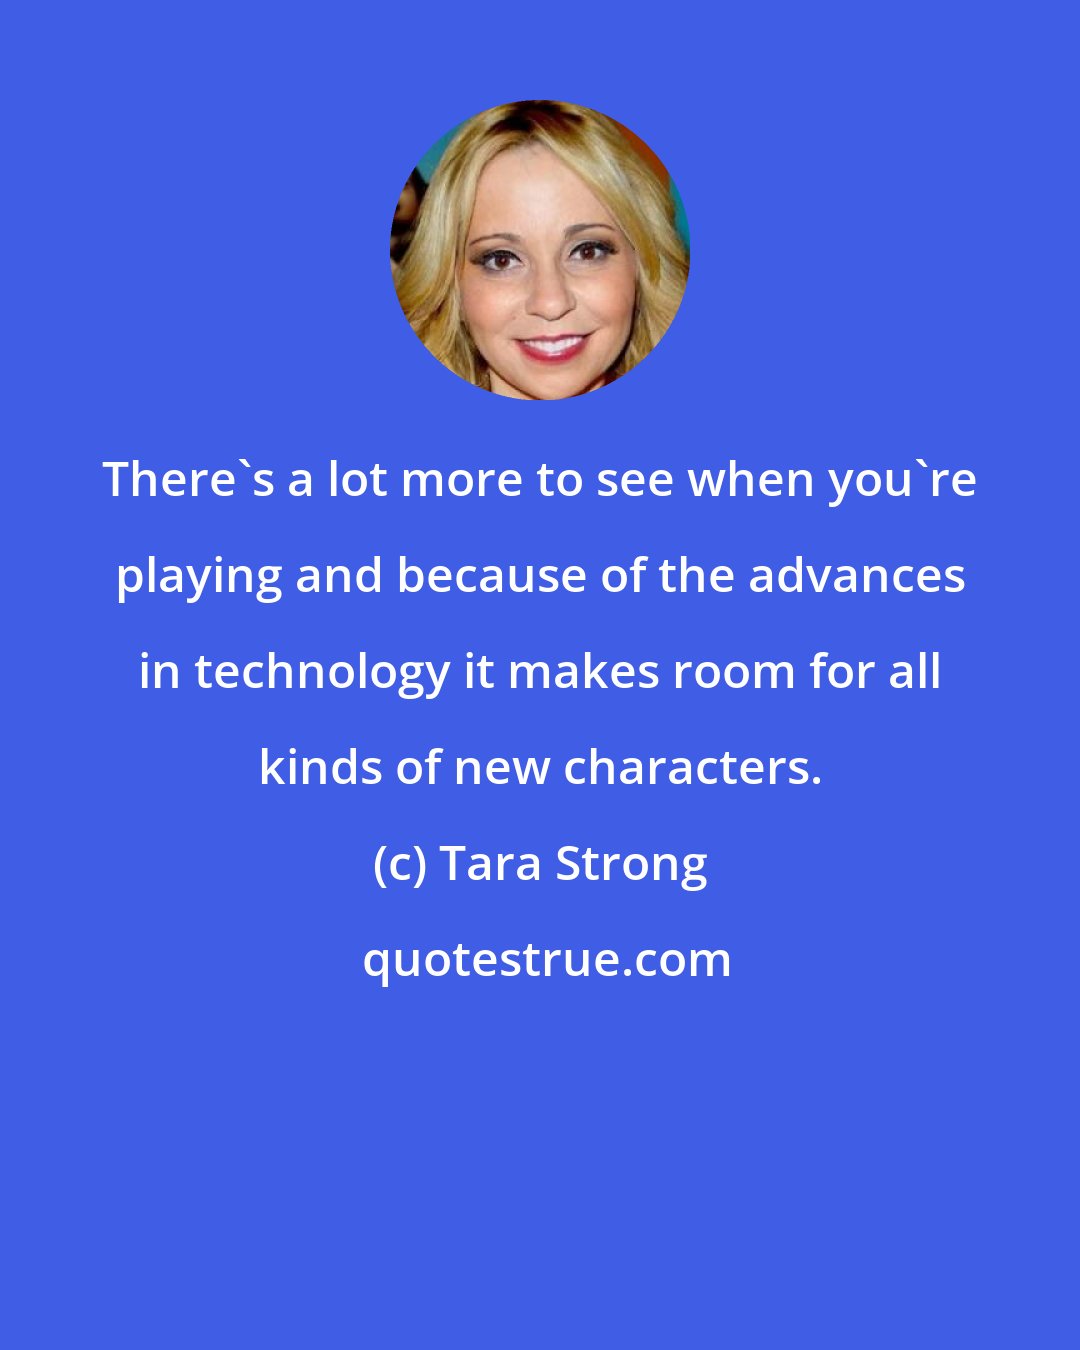 Tara Strong: There's a lot more to see when you're playing and because of the advances in technology it makes room for all kinds of new characters.